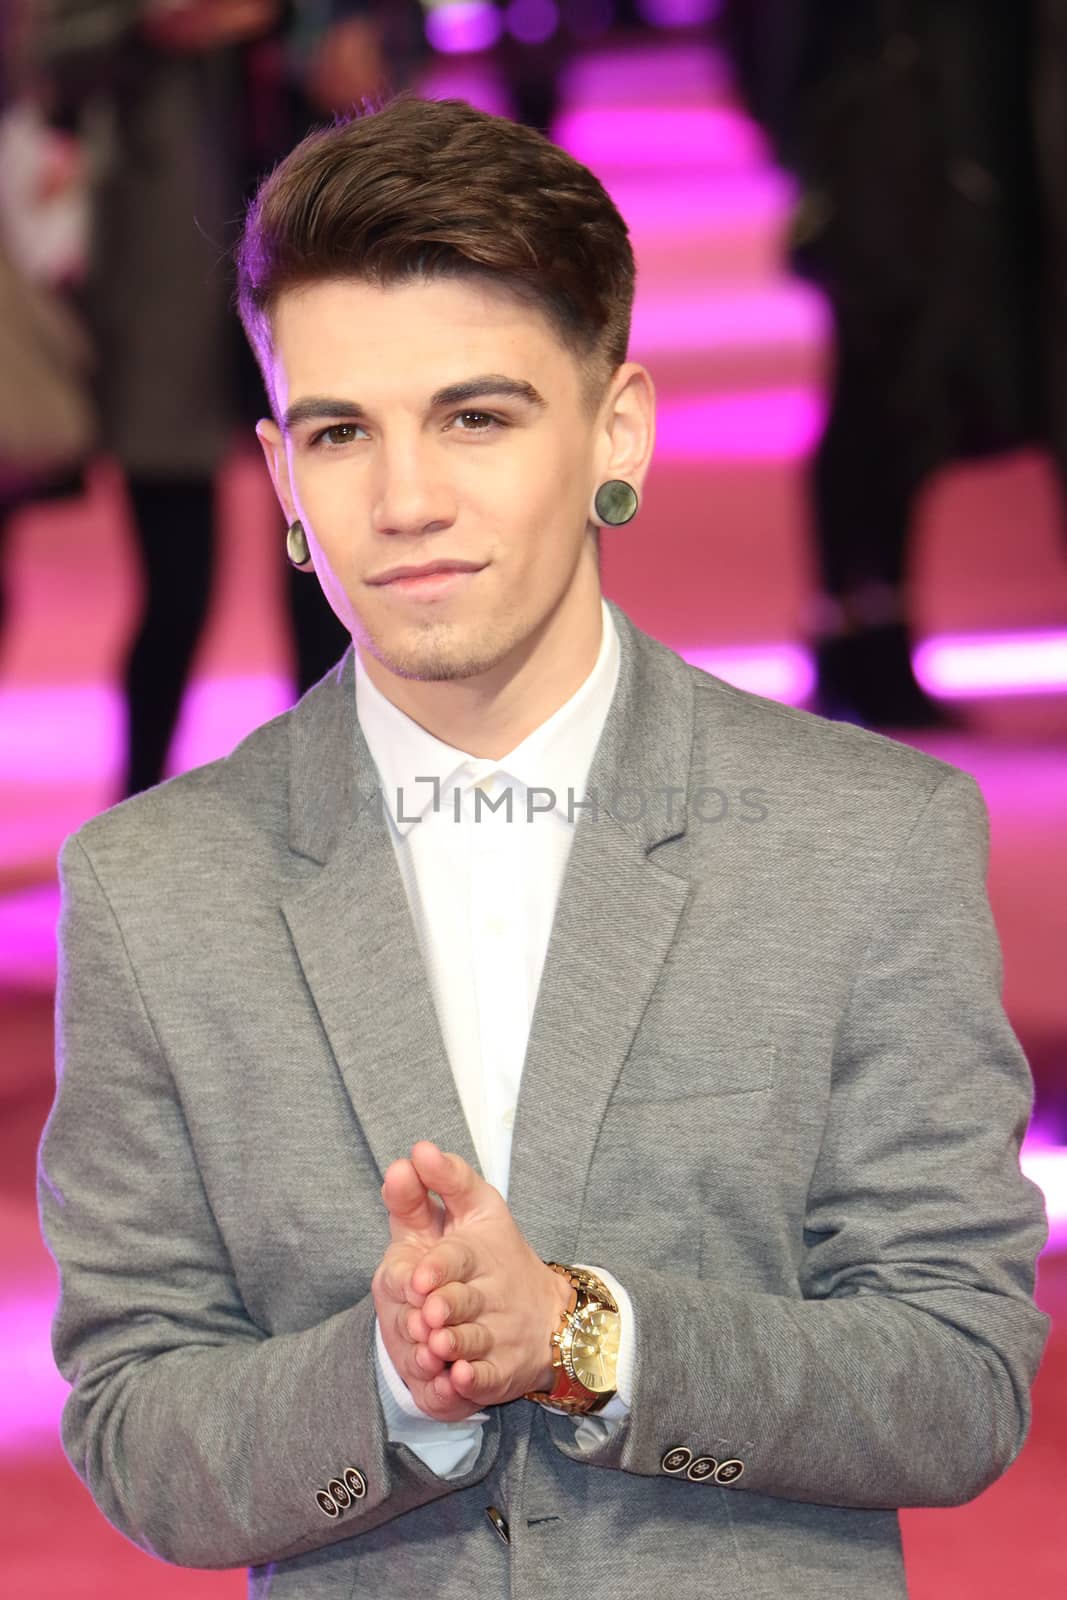 UK, London: Jake Sims is pictured at How to be single European film premiere at Leicester Square, London on February 9, 2016.